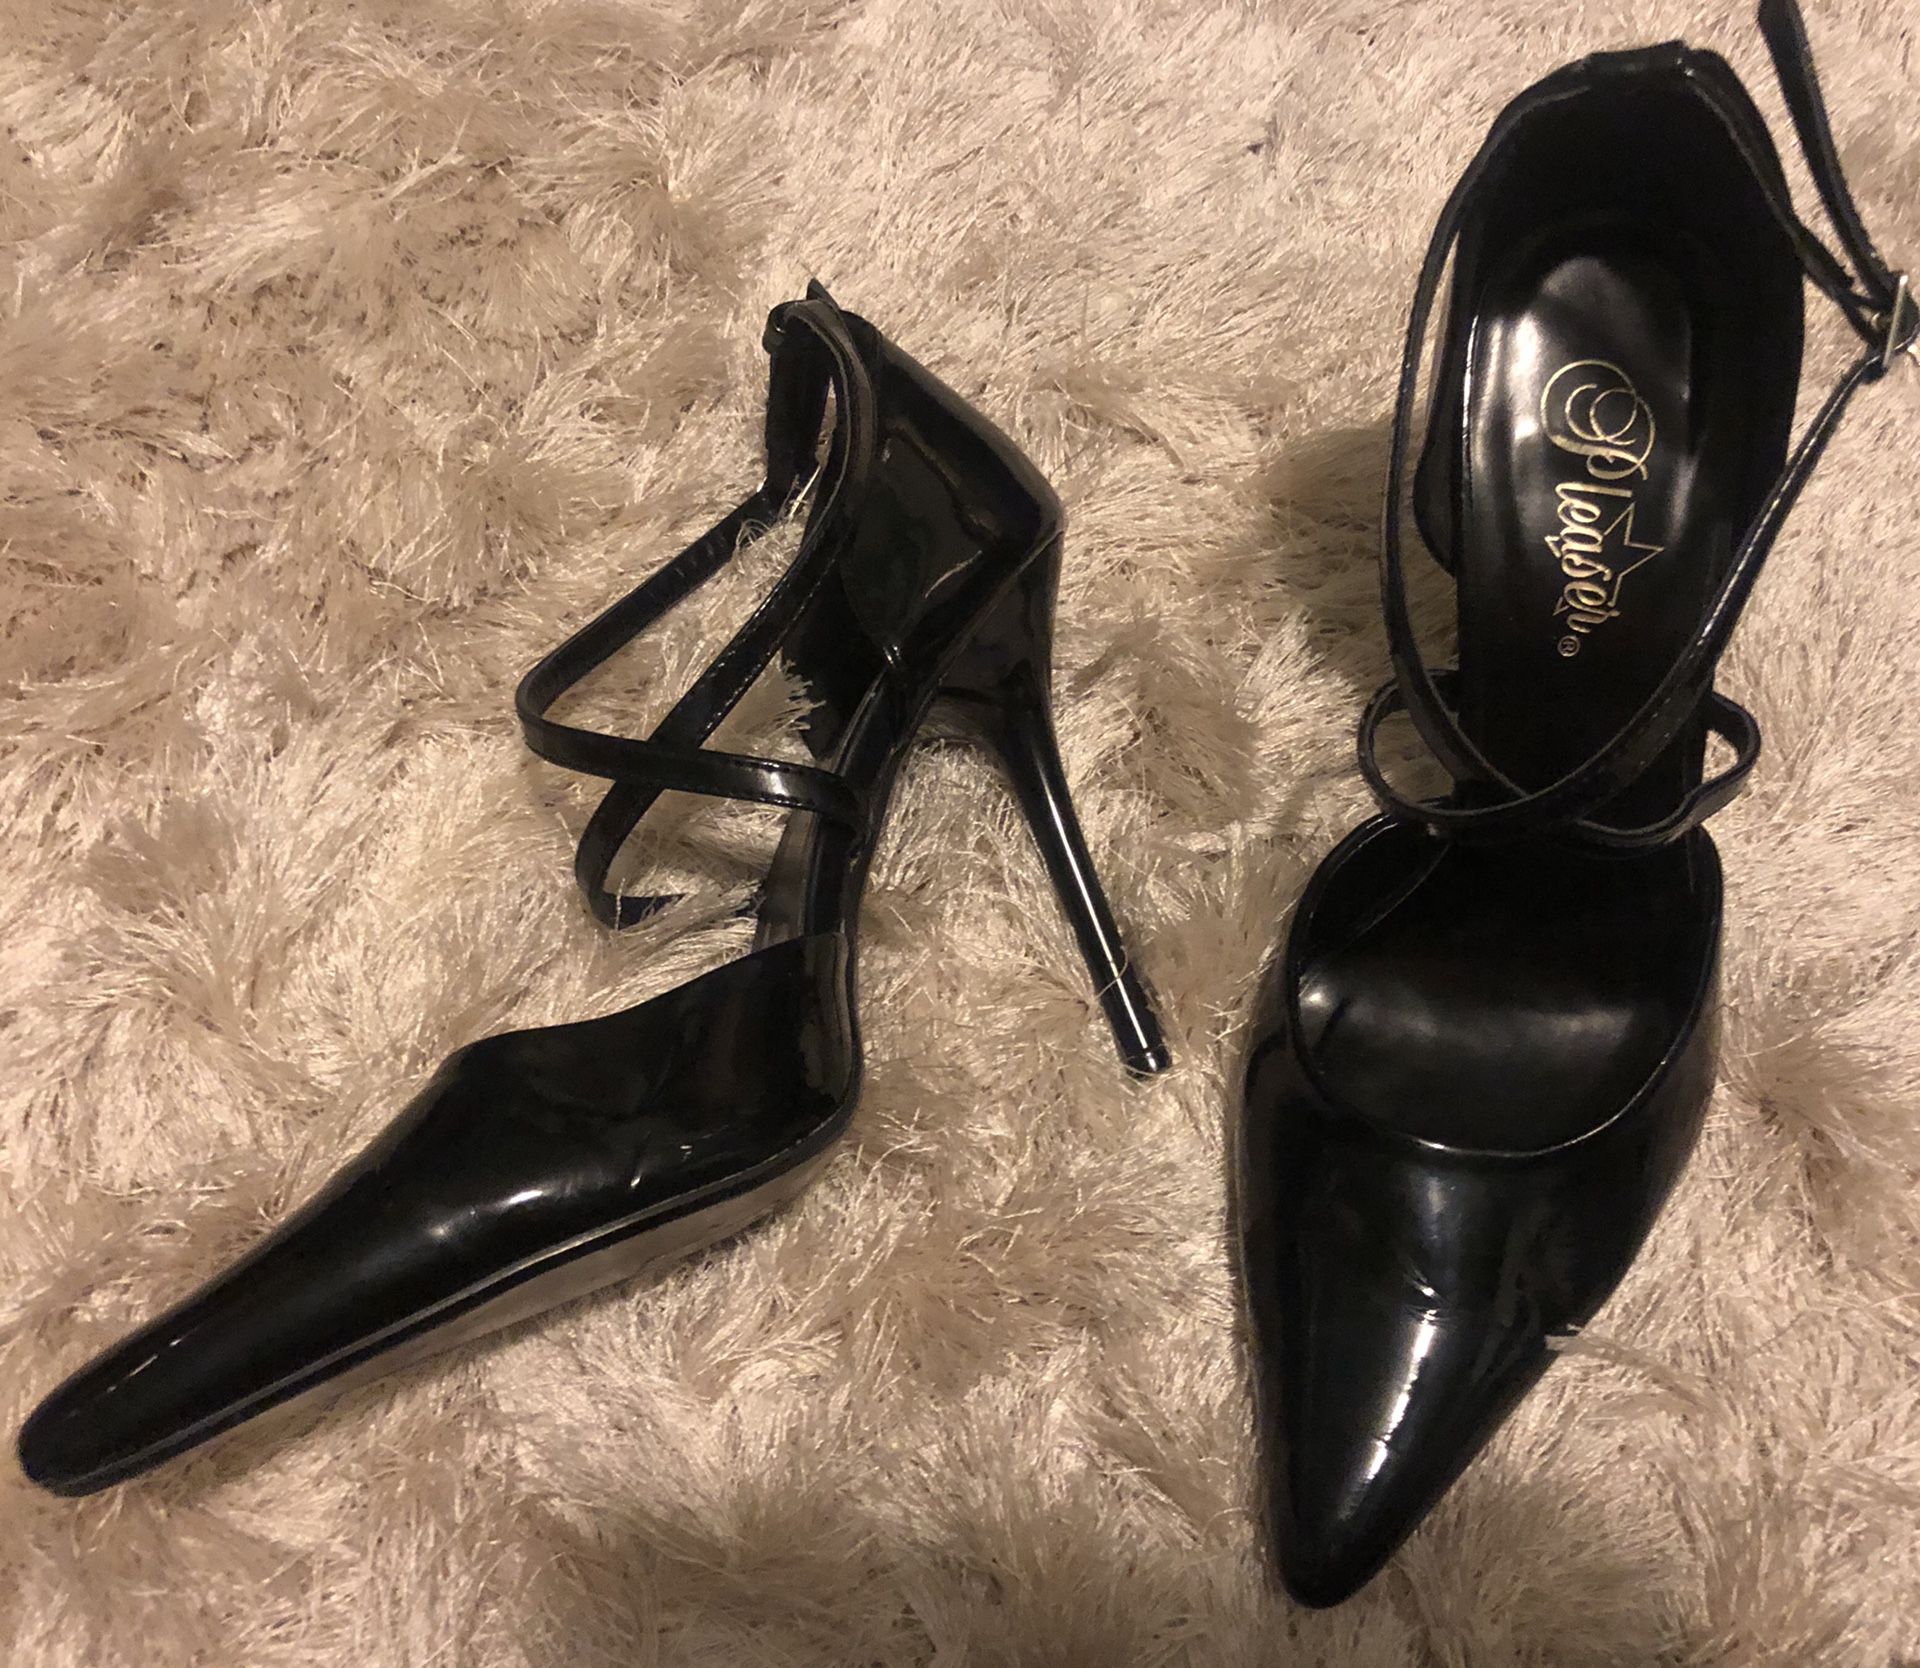 Pleaser Pointed Toe 5” Heels size 9.5